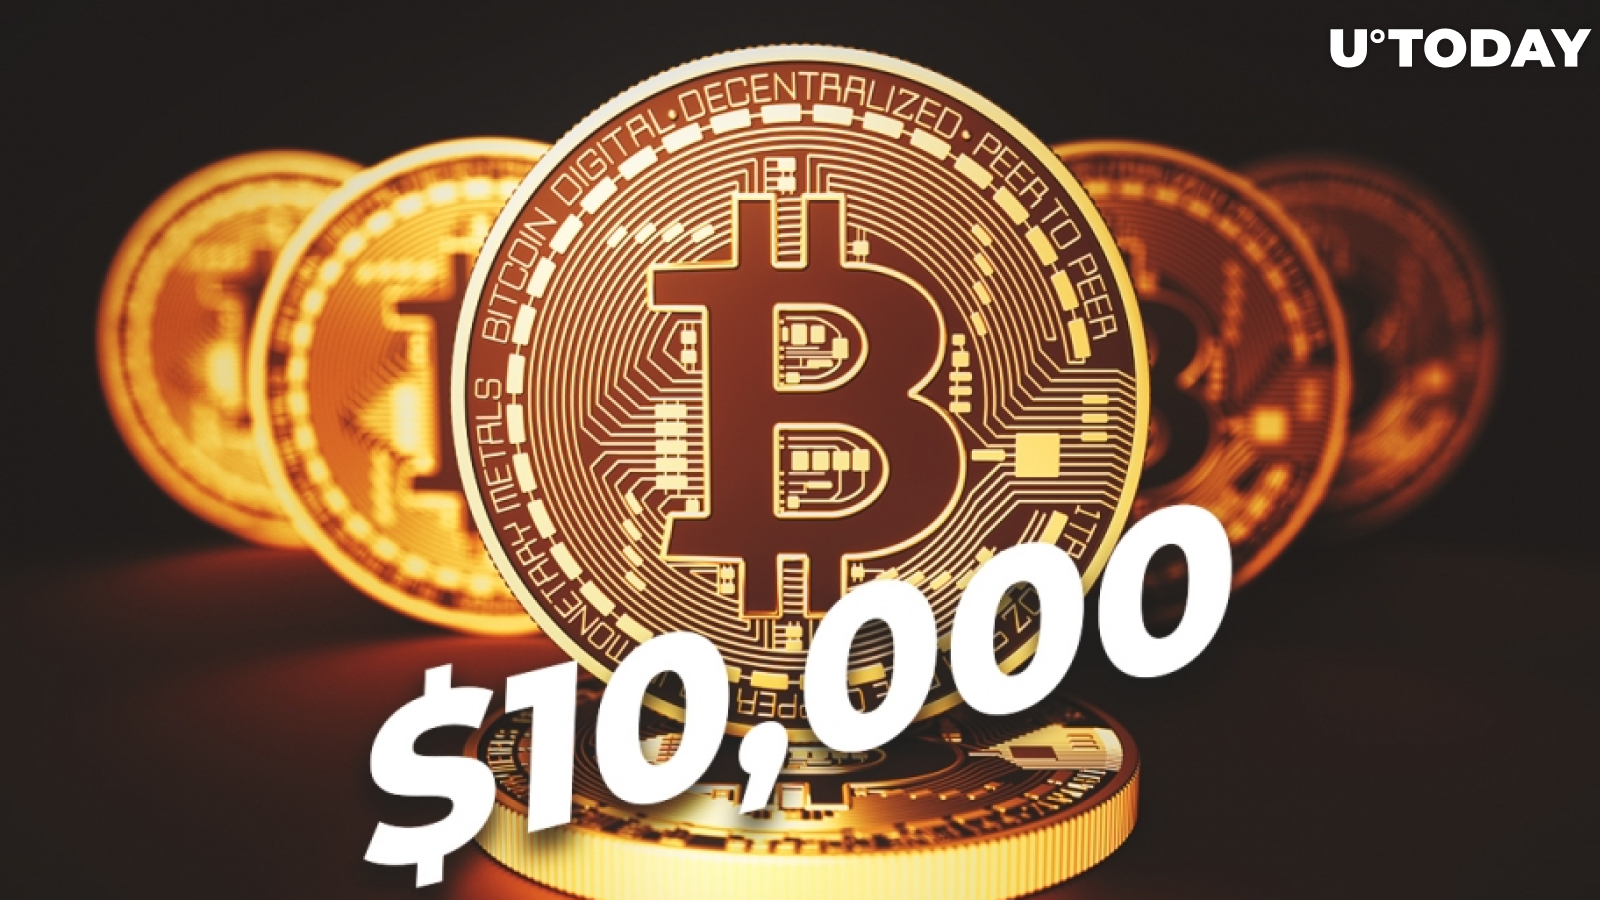 Bitcoin's $10,000 Support Displays Record-Breaking Resilience